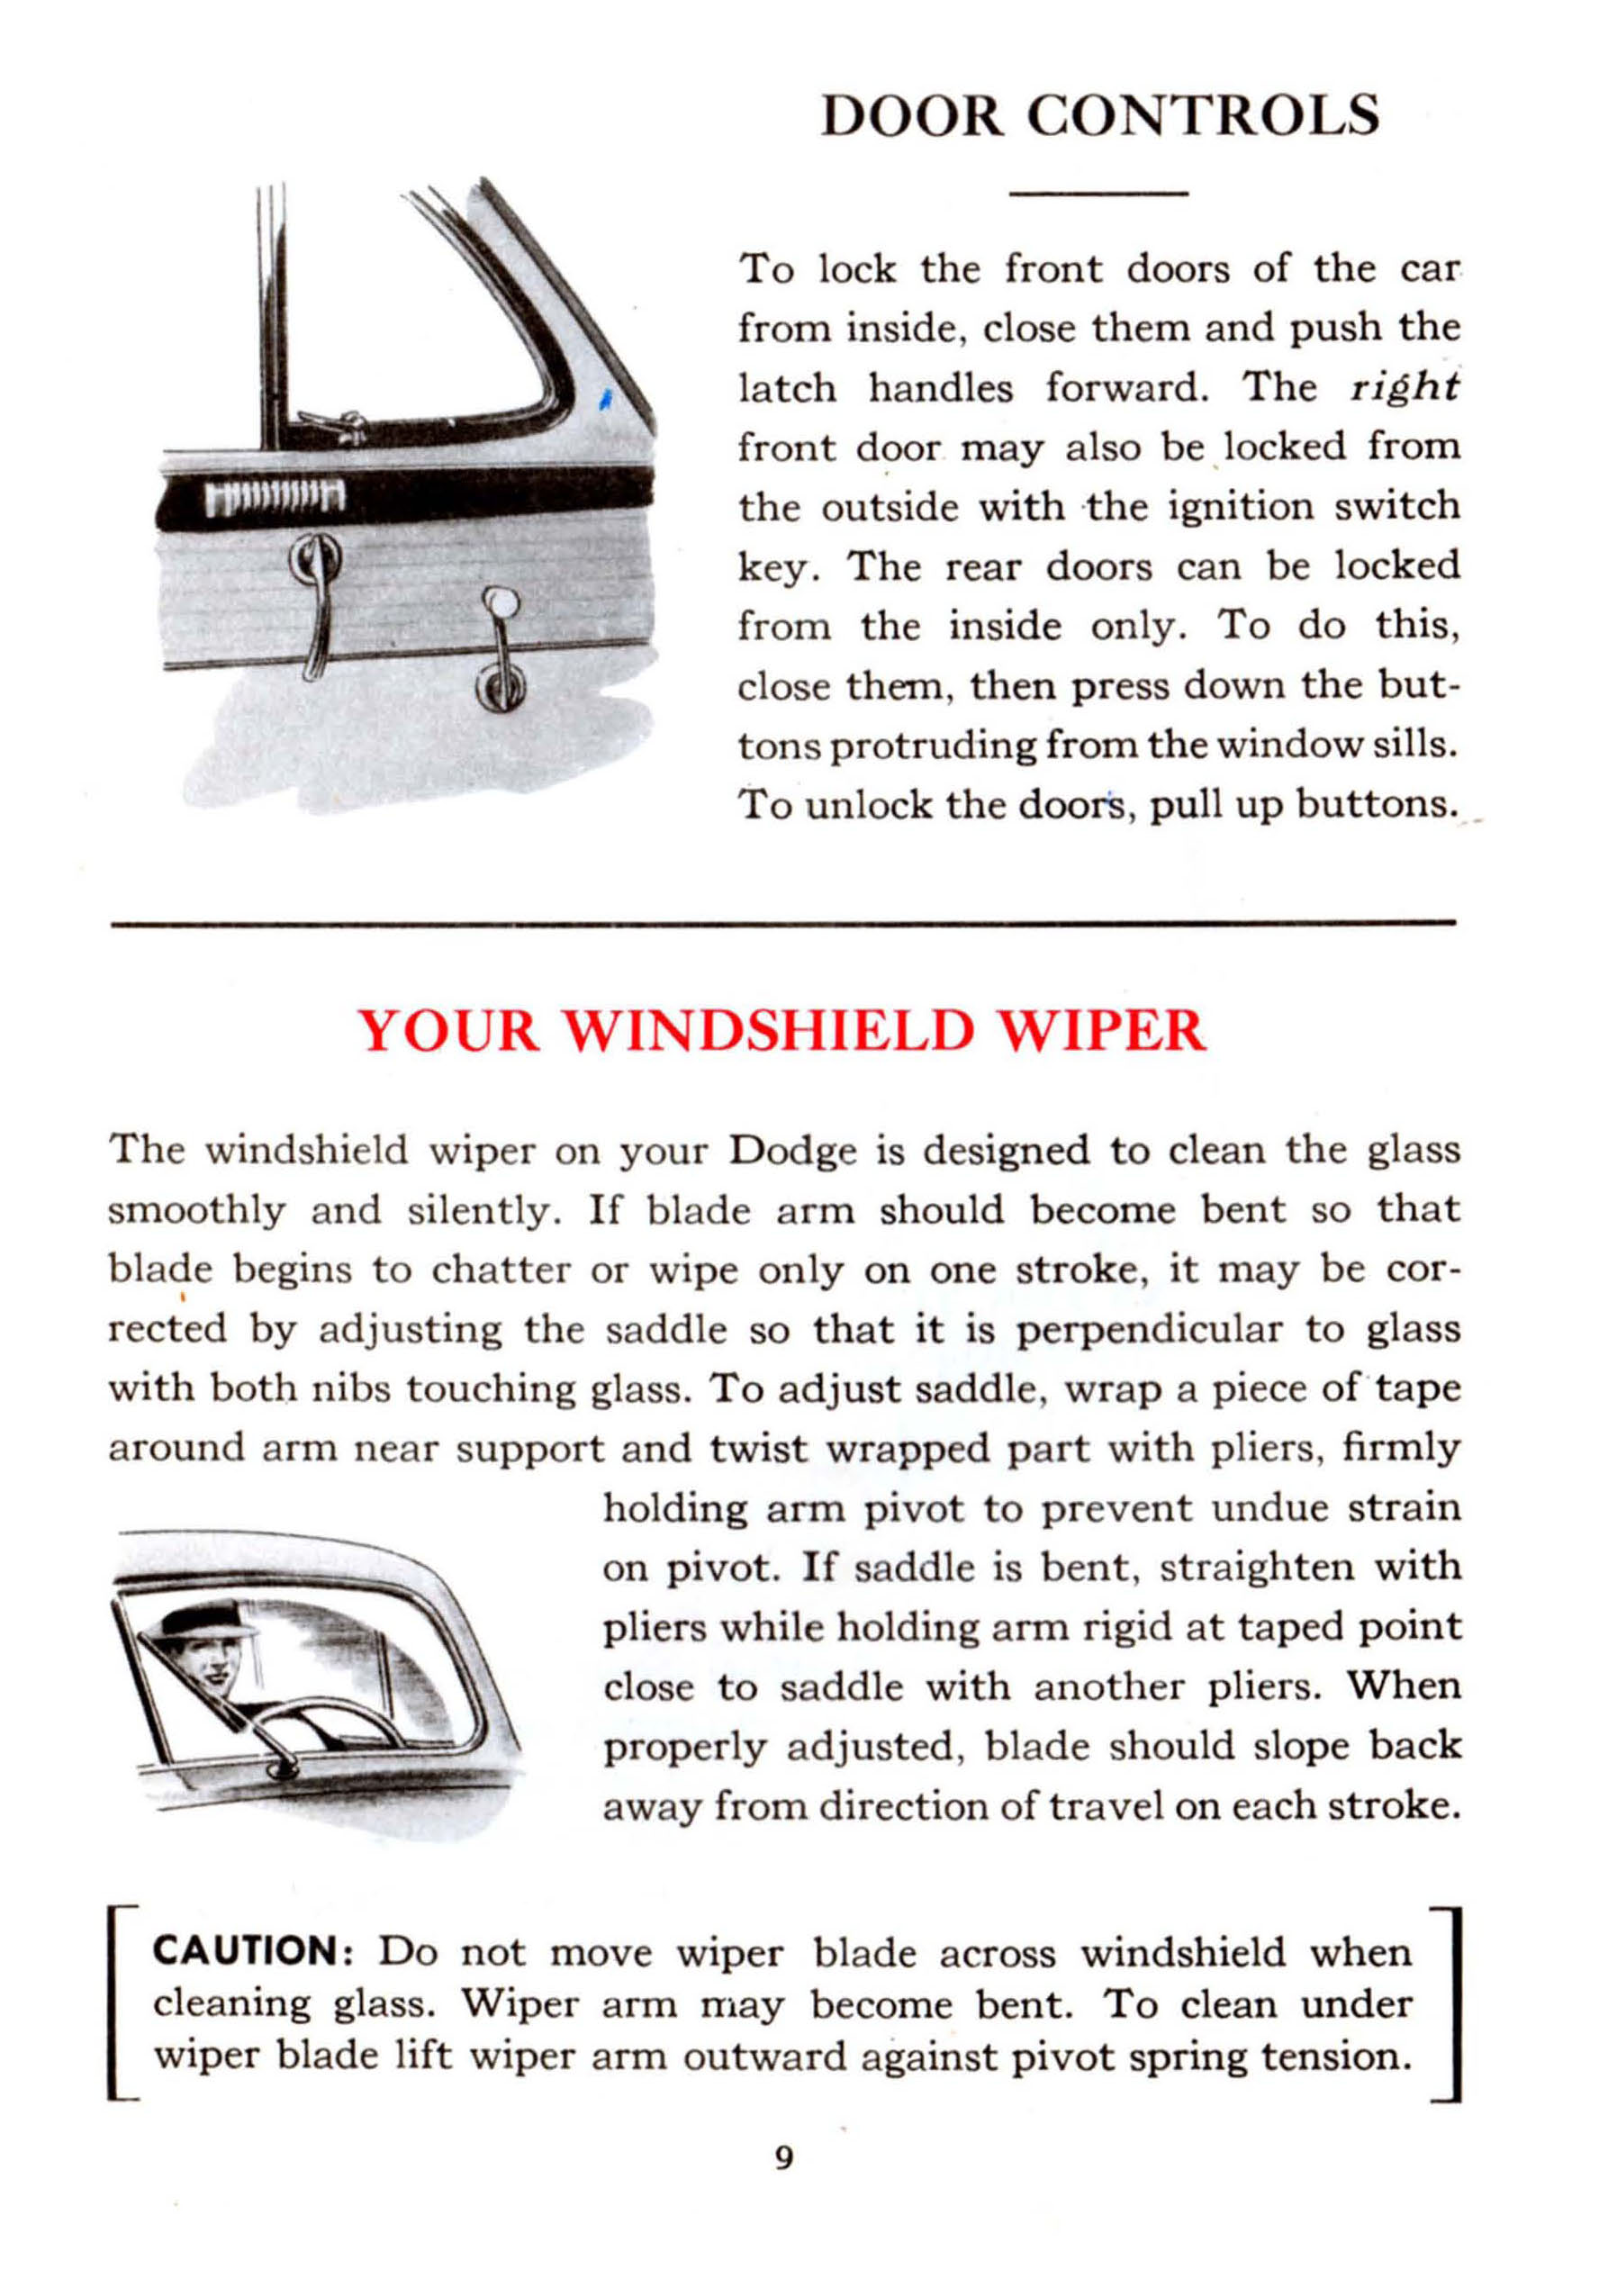 1941_Dodge_Owners_Manual-09